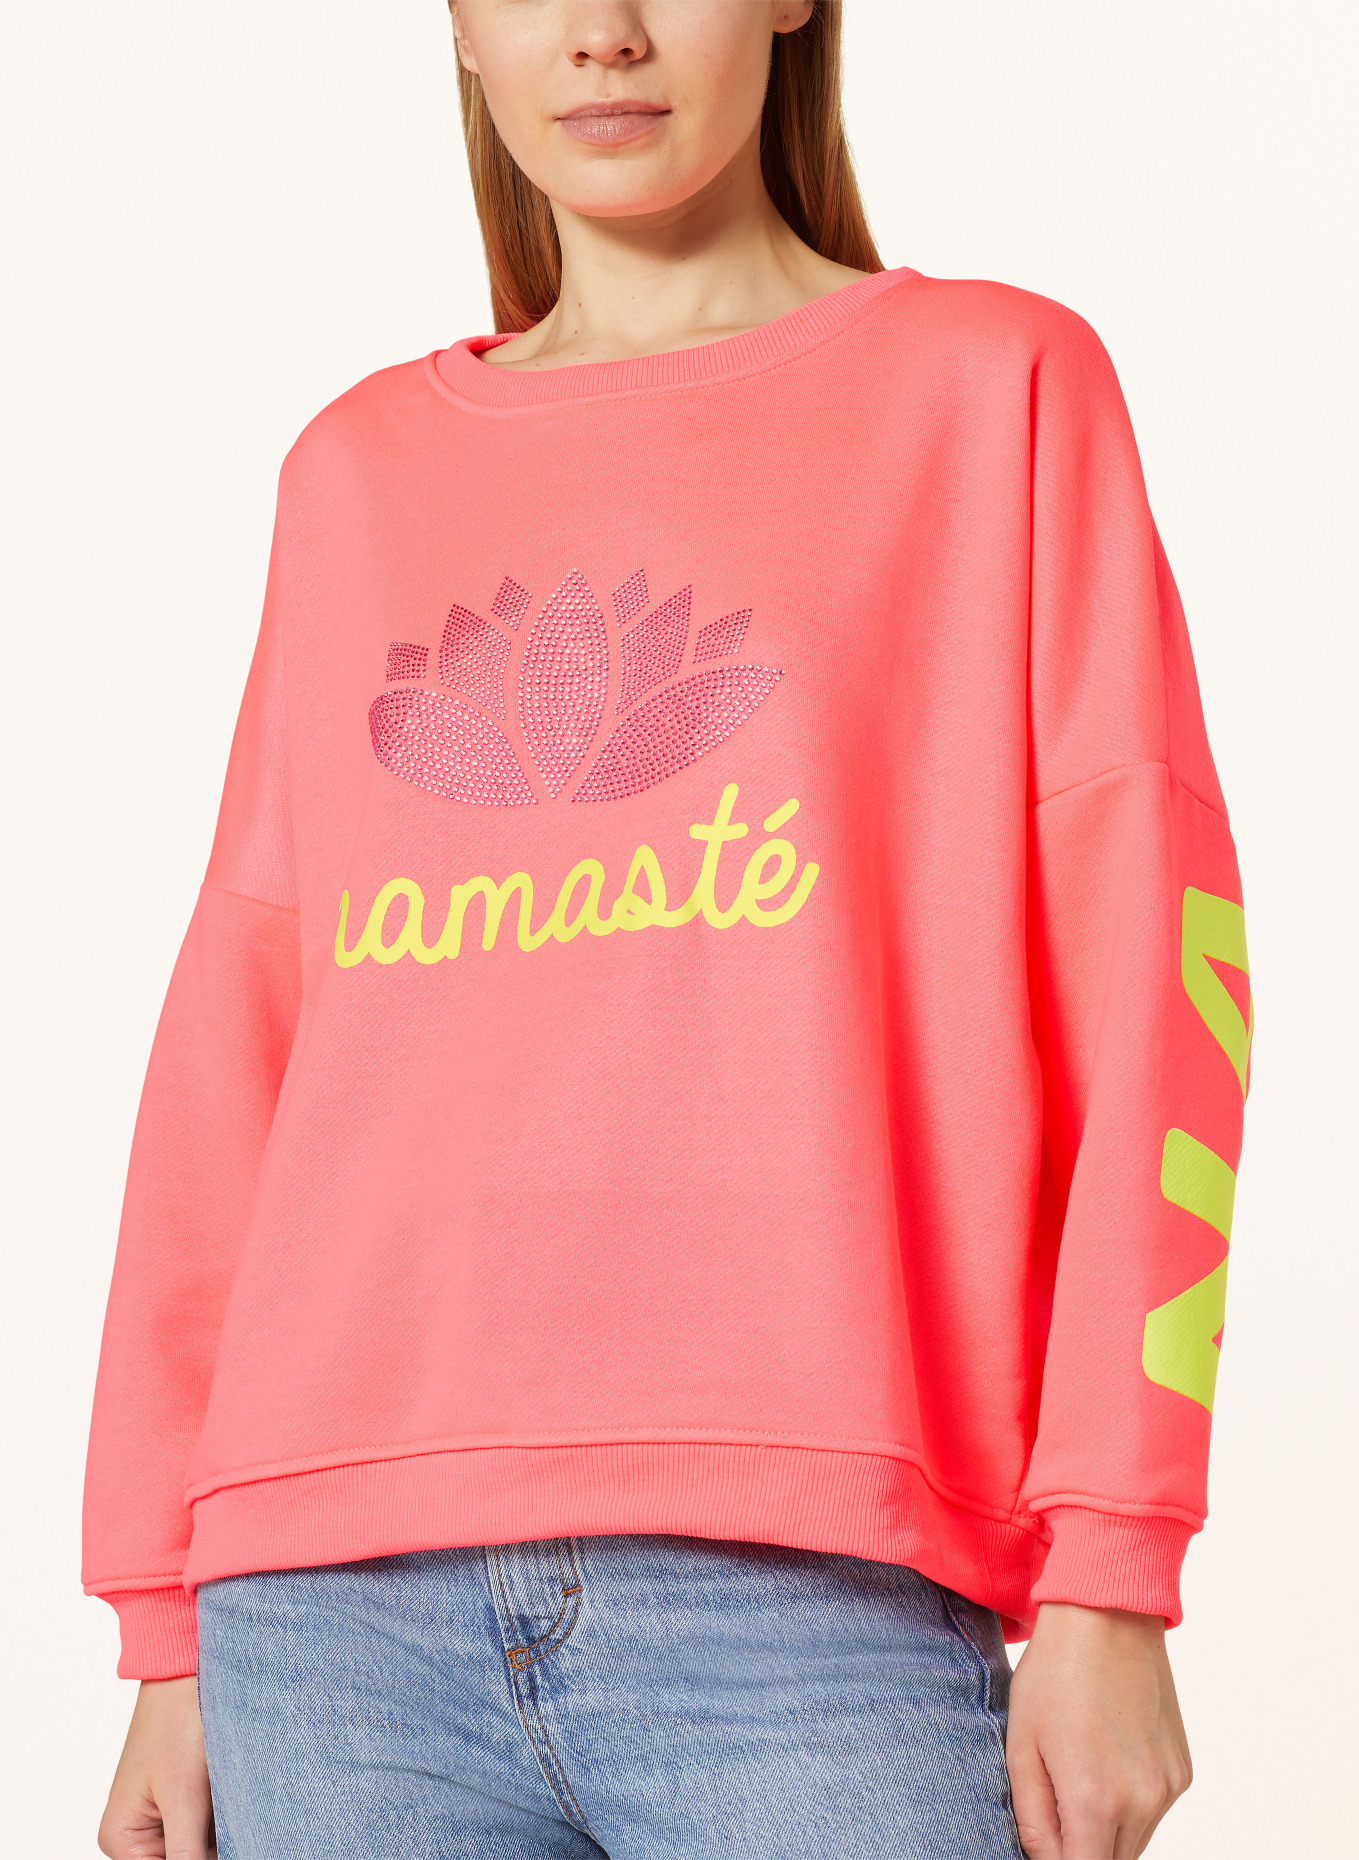 miss goodlife Sweatshirt with decorative gems, Color: NEON PINK/ NEON YELLOW (Image 4)